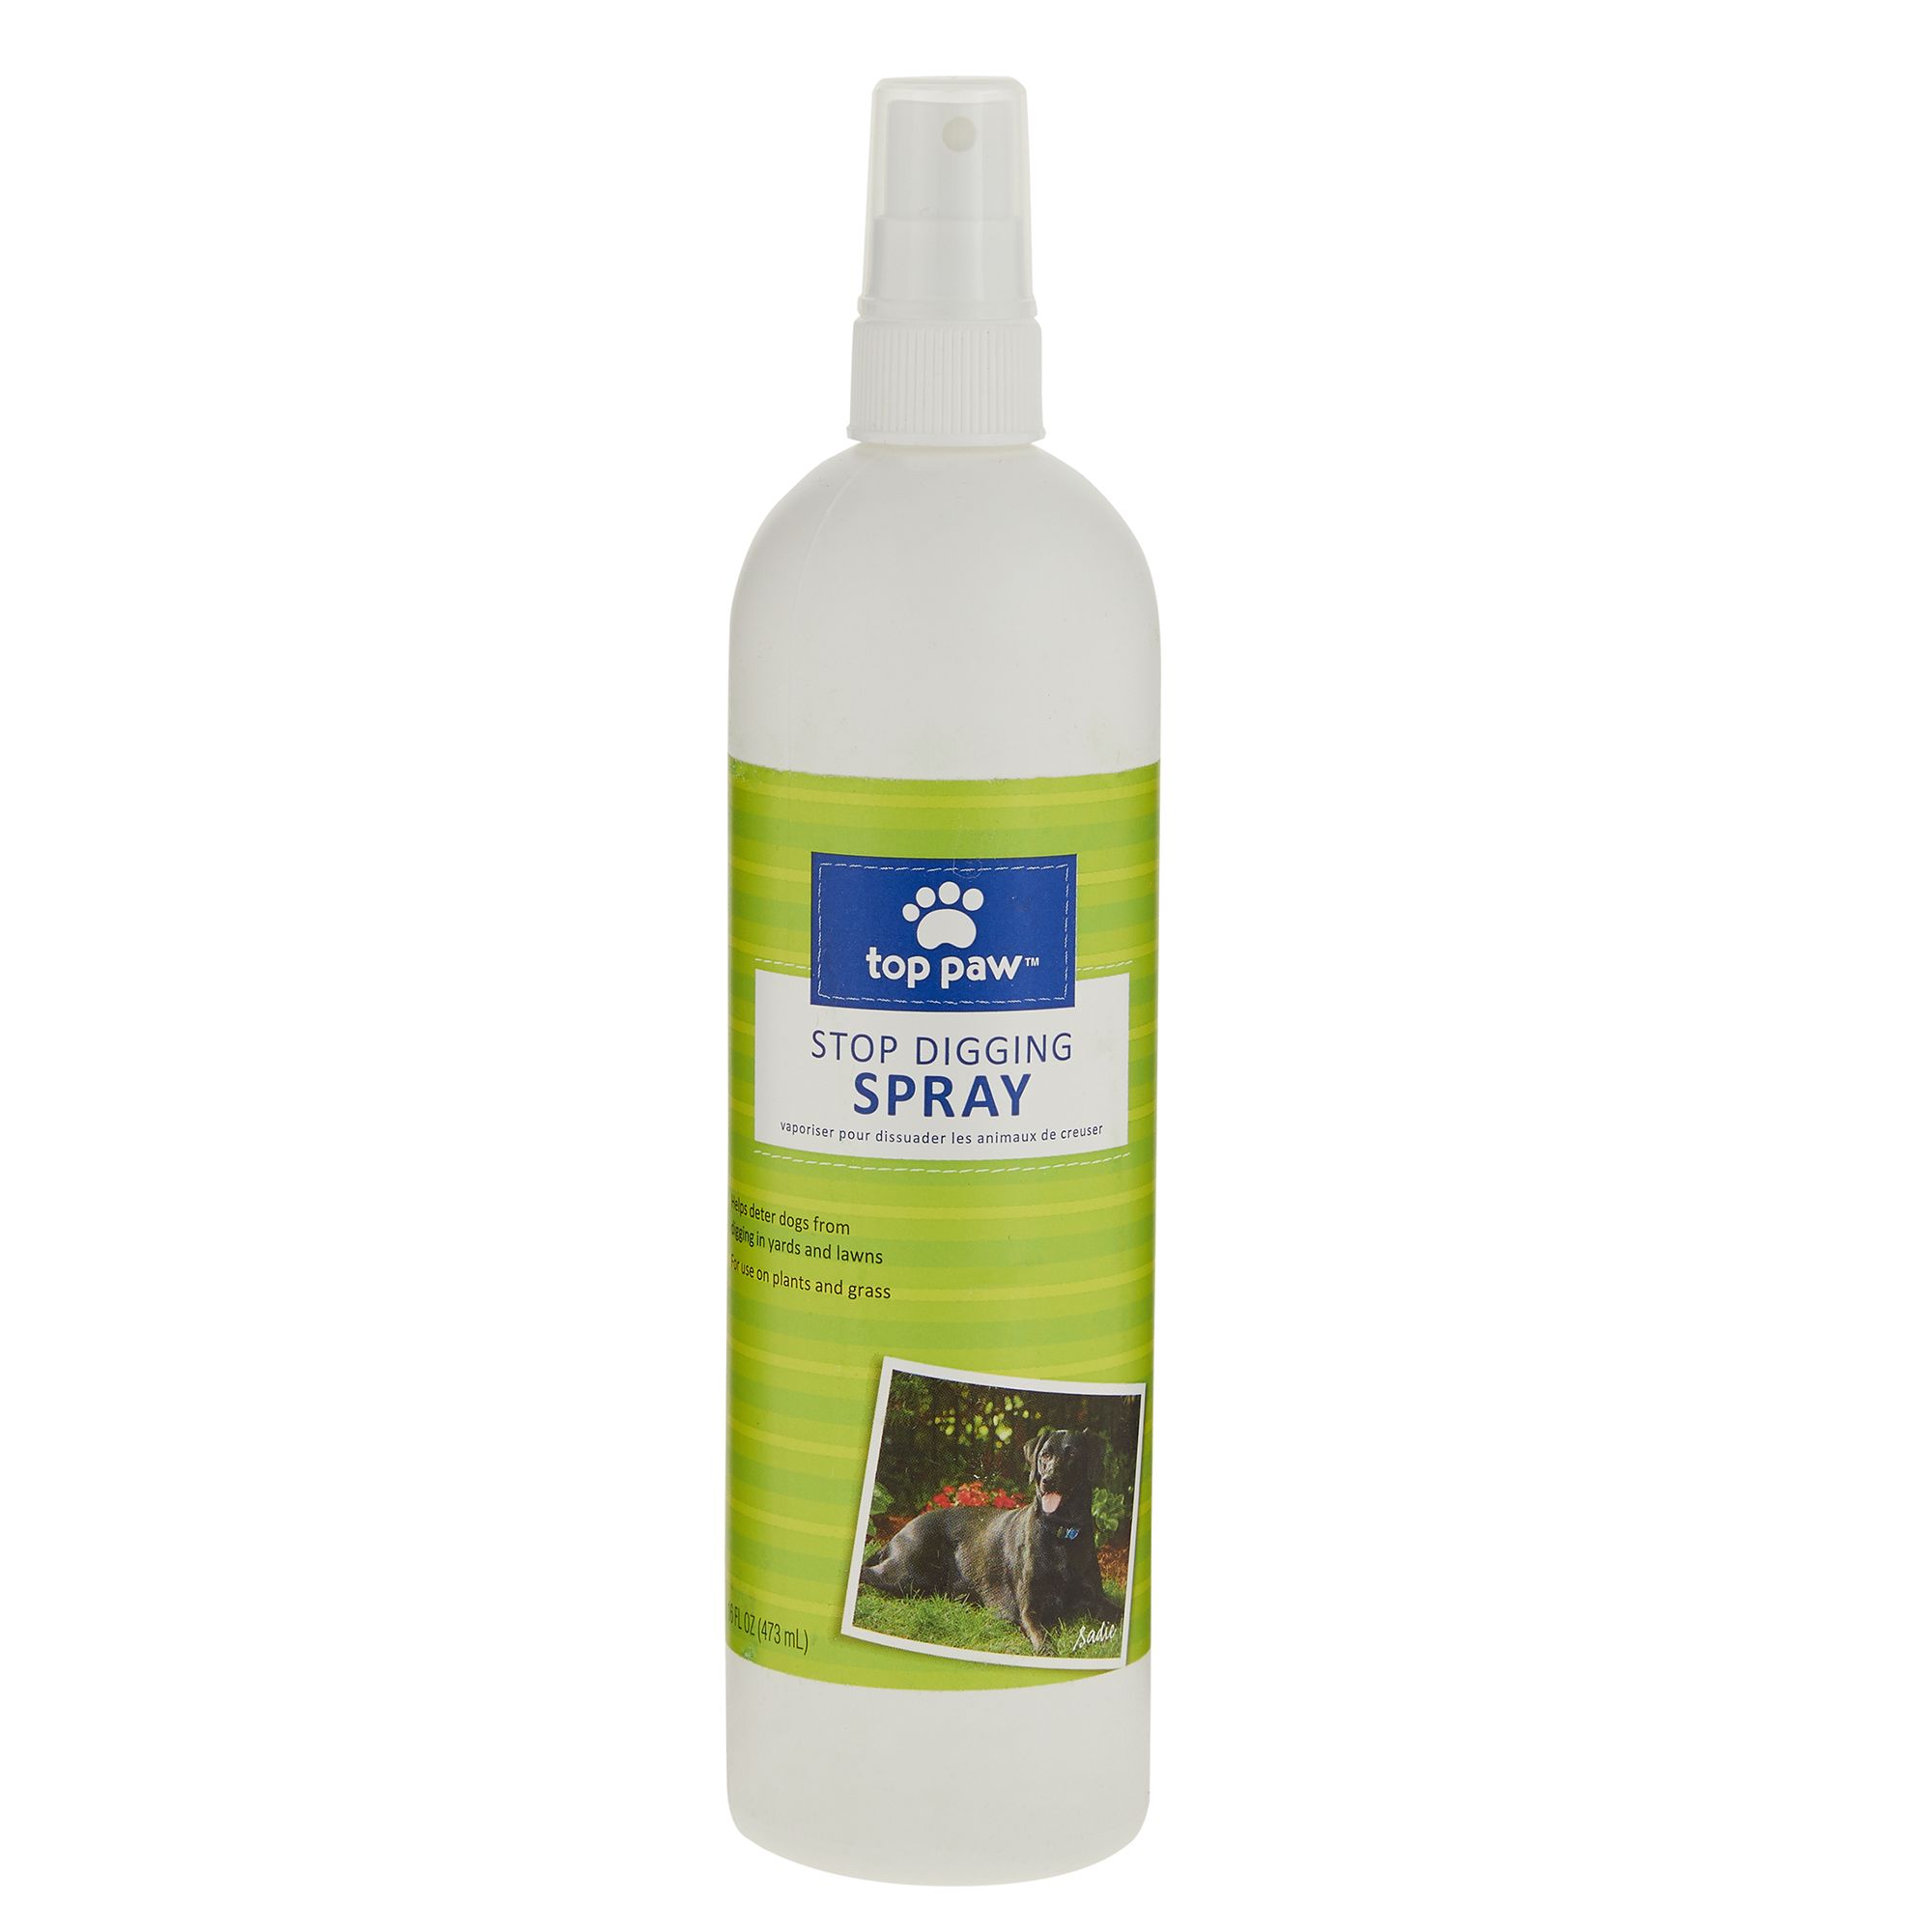 spray to deter dogs from digging